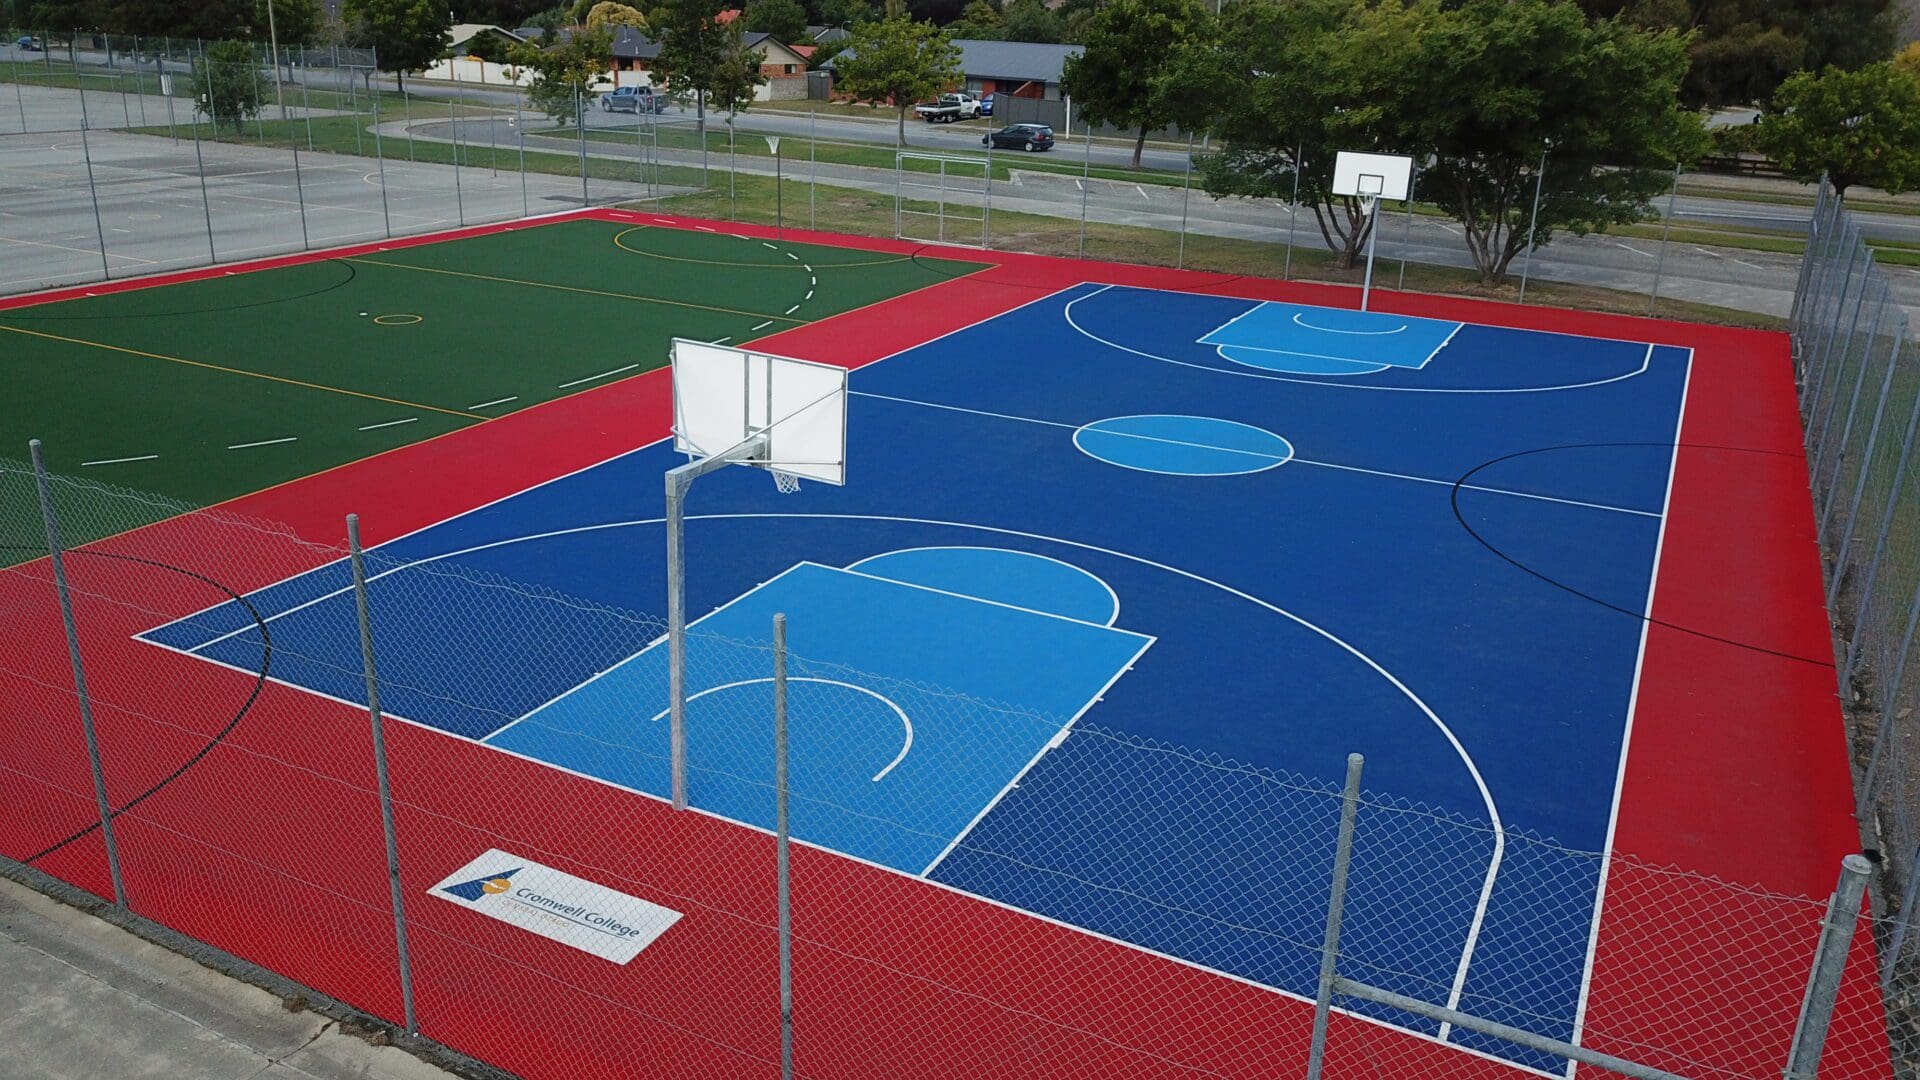 TigerTurf Advantage is an outstanding surface for New Zealand high schools 